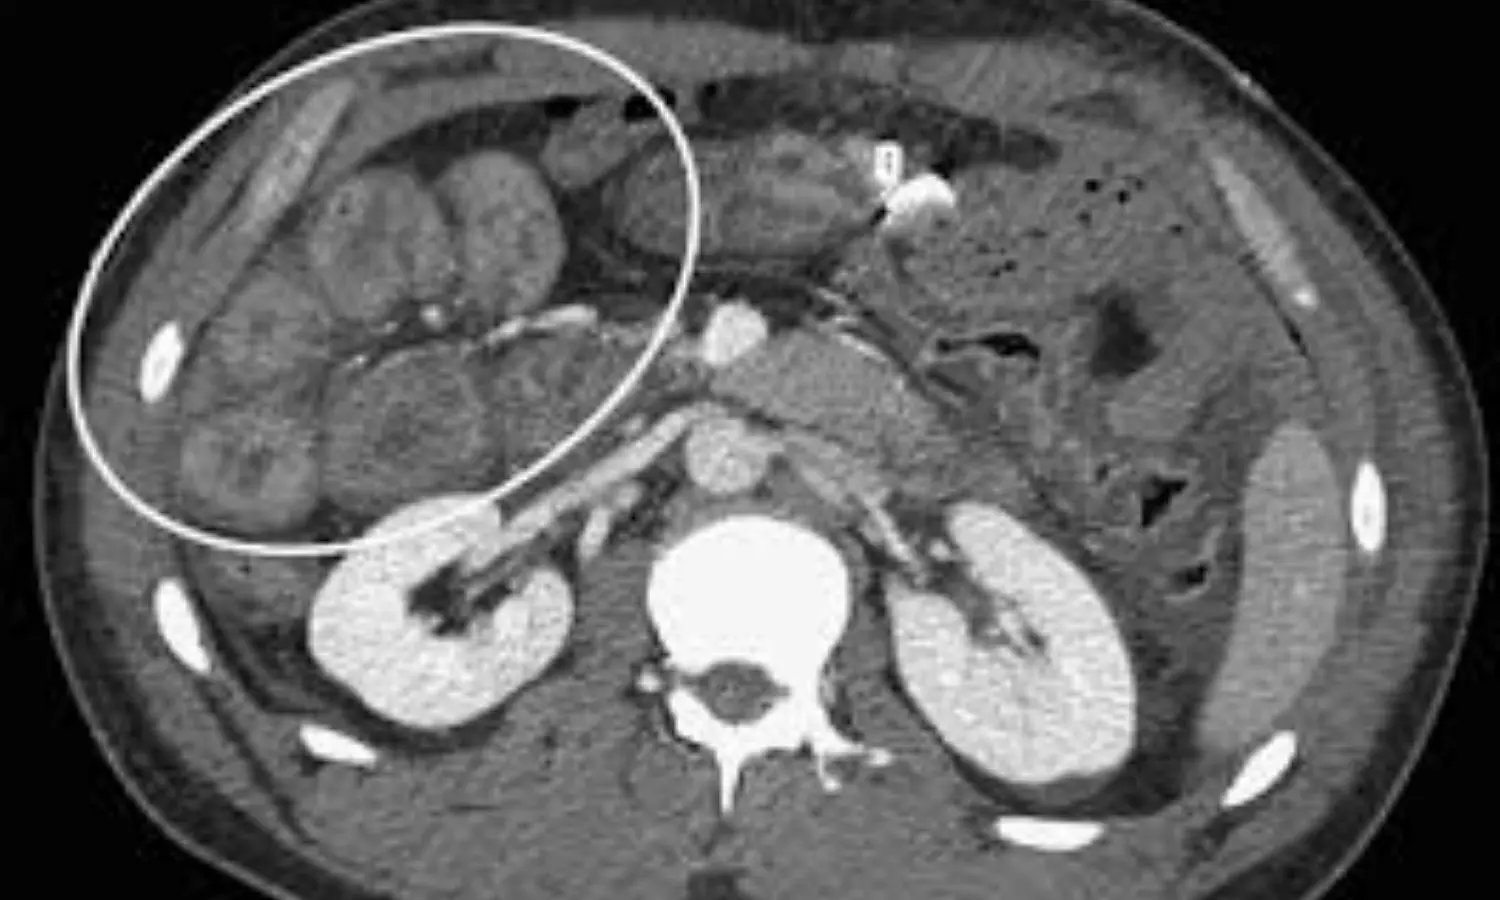 Free fluid on CT, acceptable indicator for surgery in traumatic bowel mesenteric injury: Study